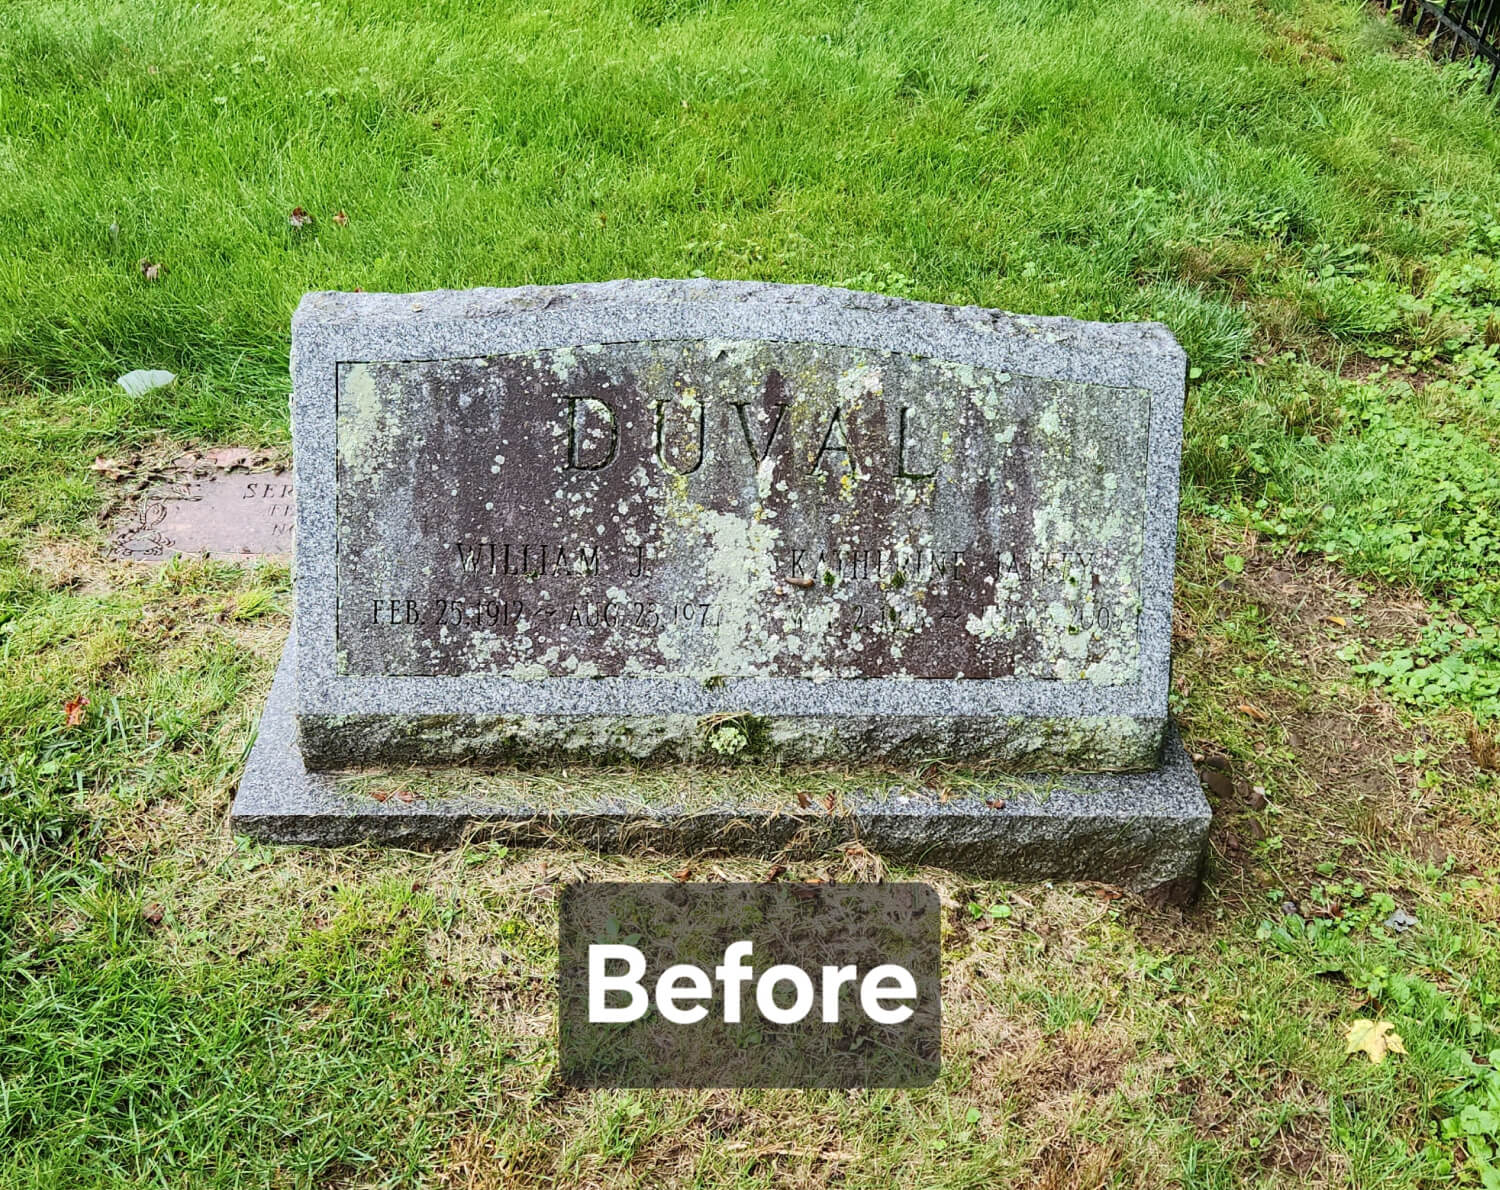 Small Headstone Before